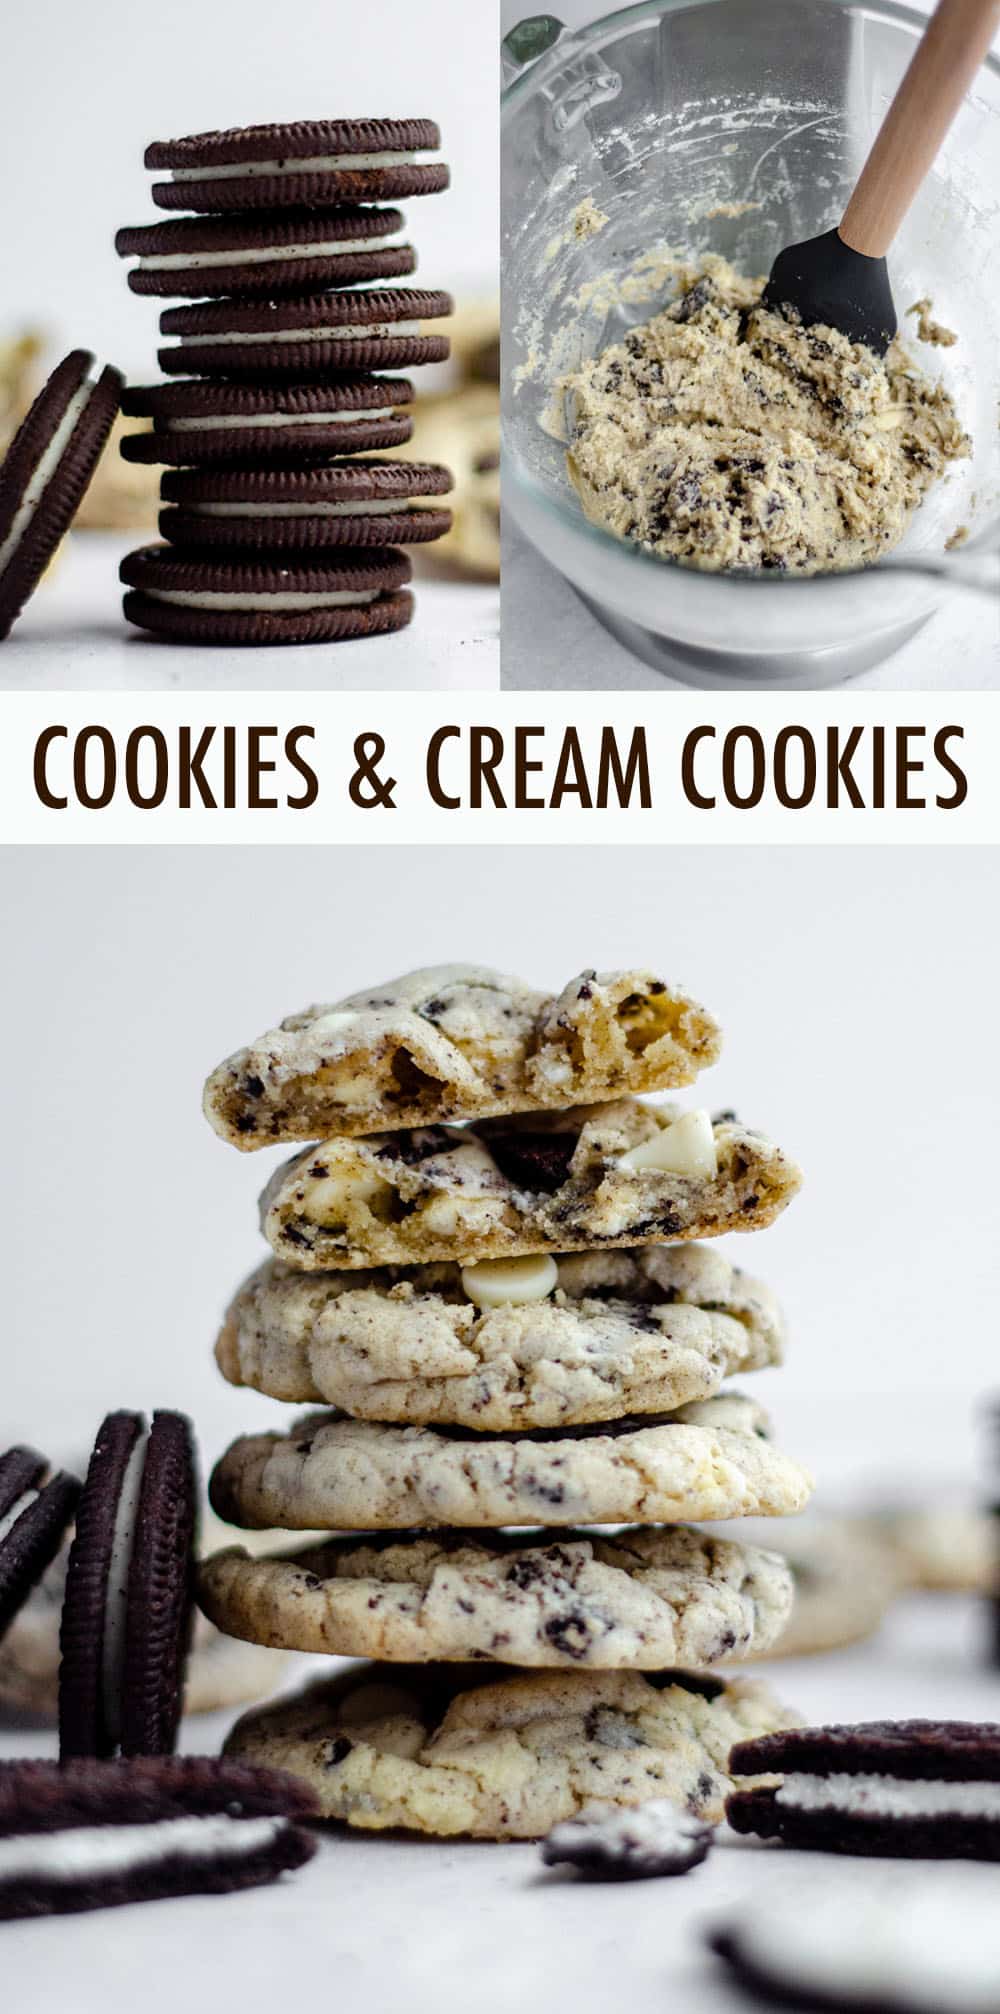 Chewy, no chill white chocolate chip cookies filled with chunks of crunchy Oreo cookies. via @frshaprilflours